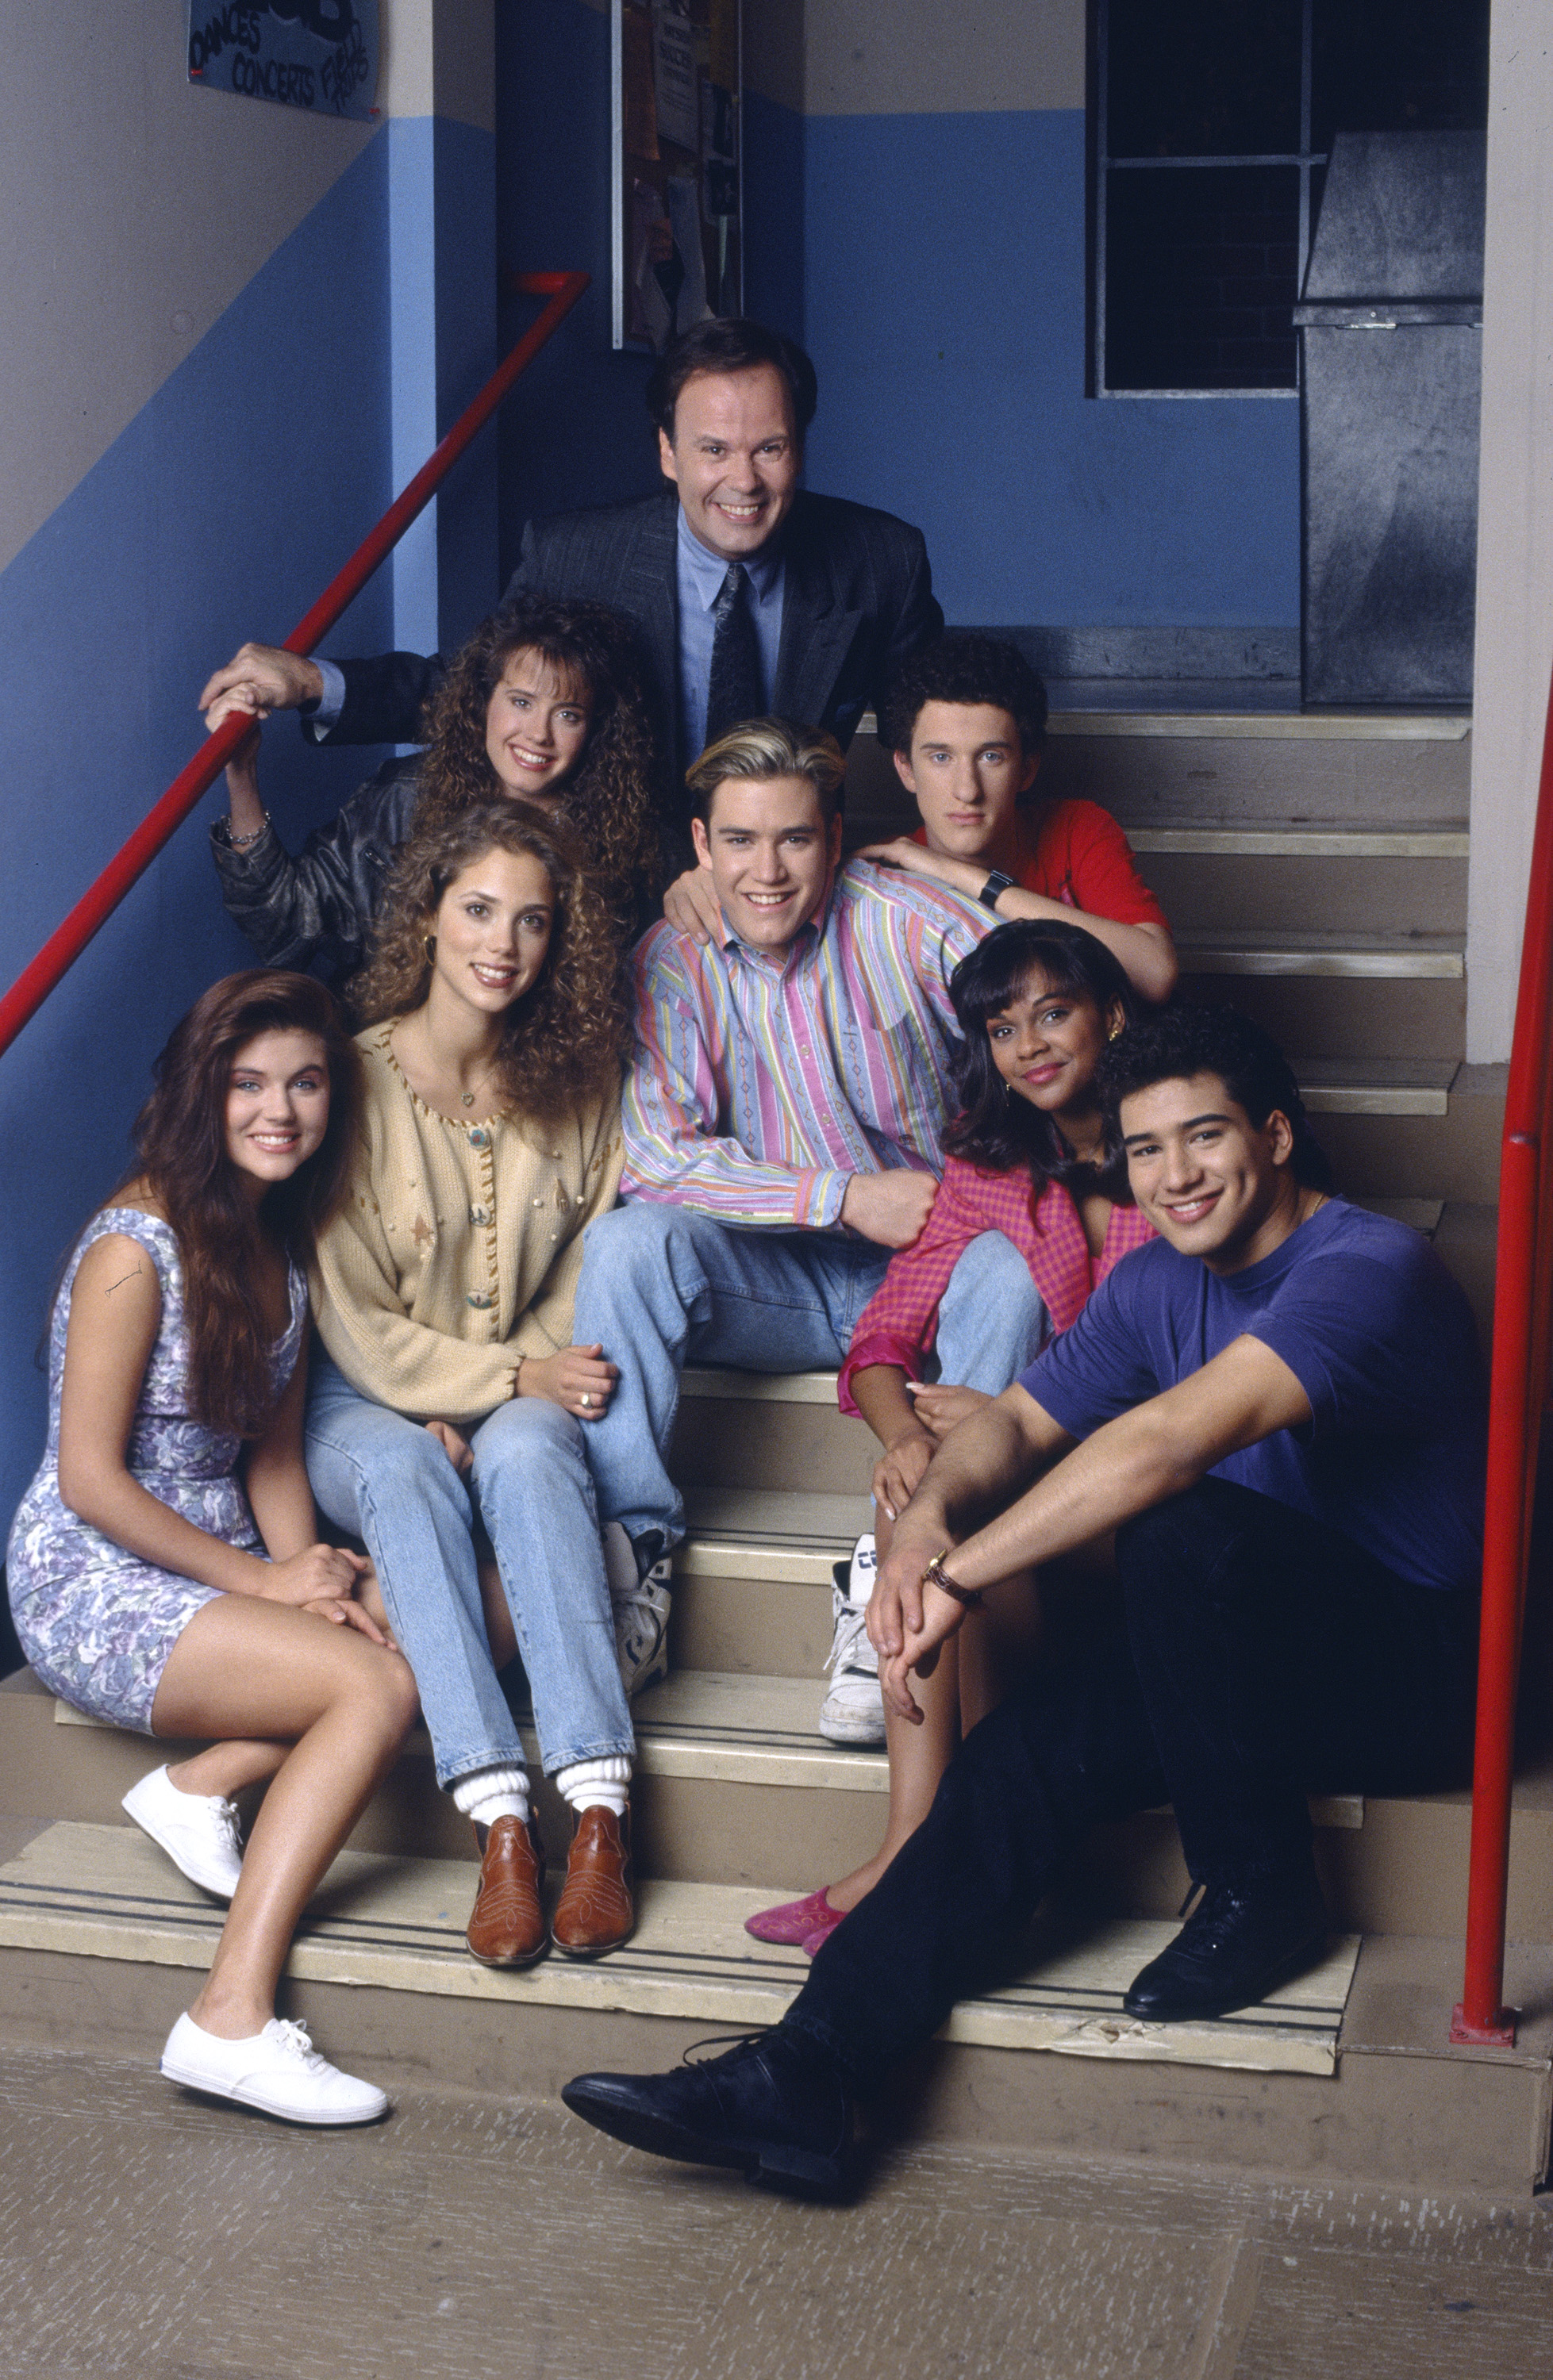 Elizabeth pictured with her Saved By The Bell castmates